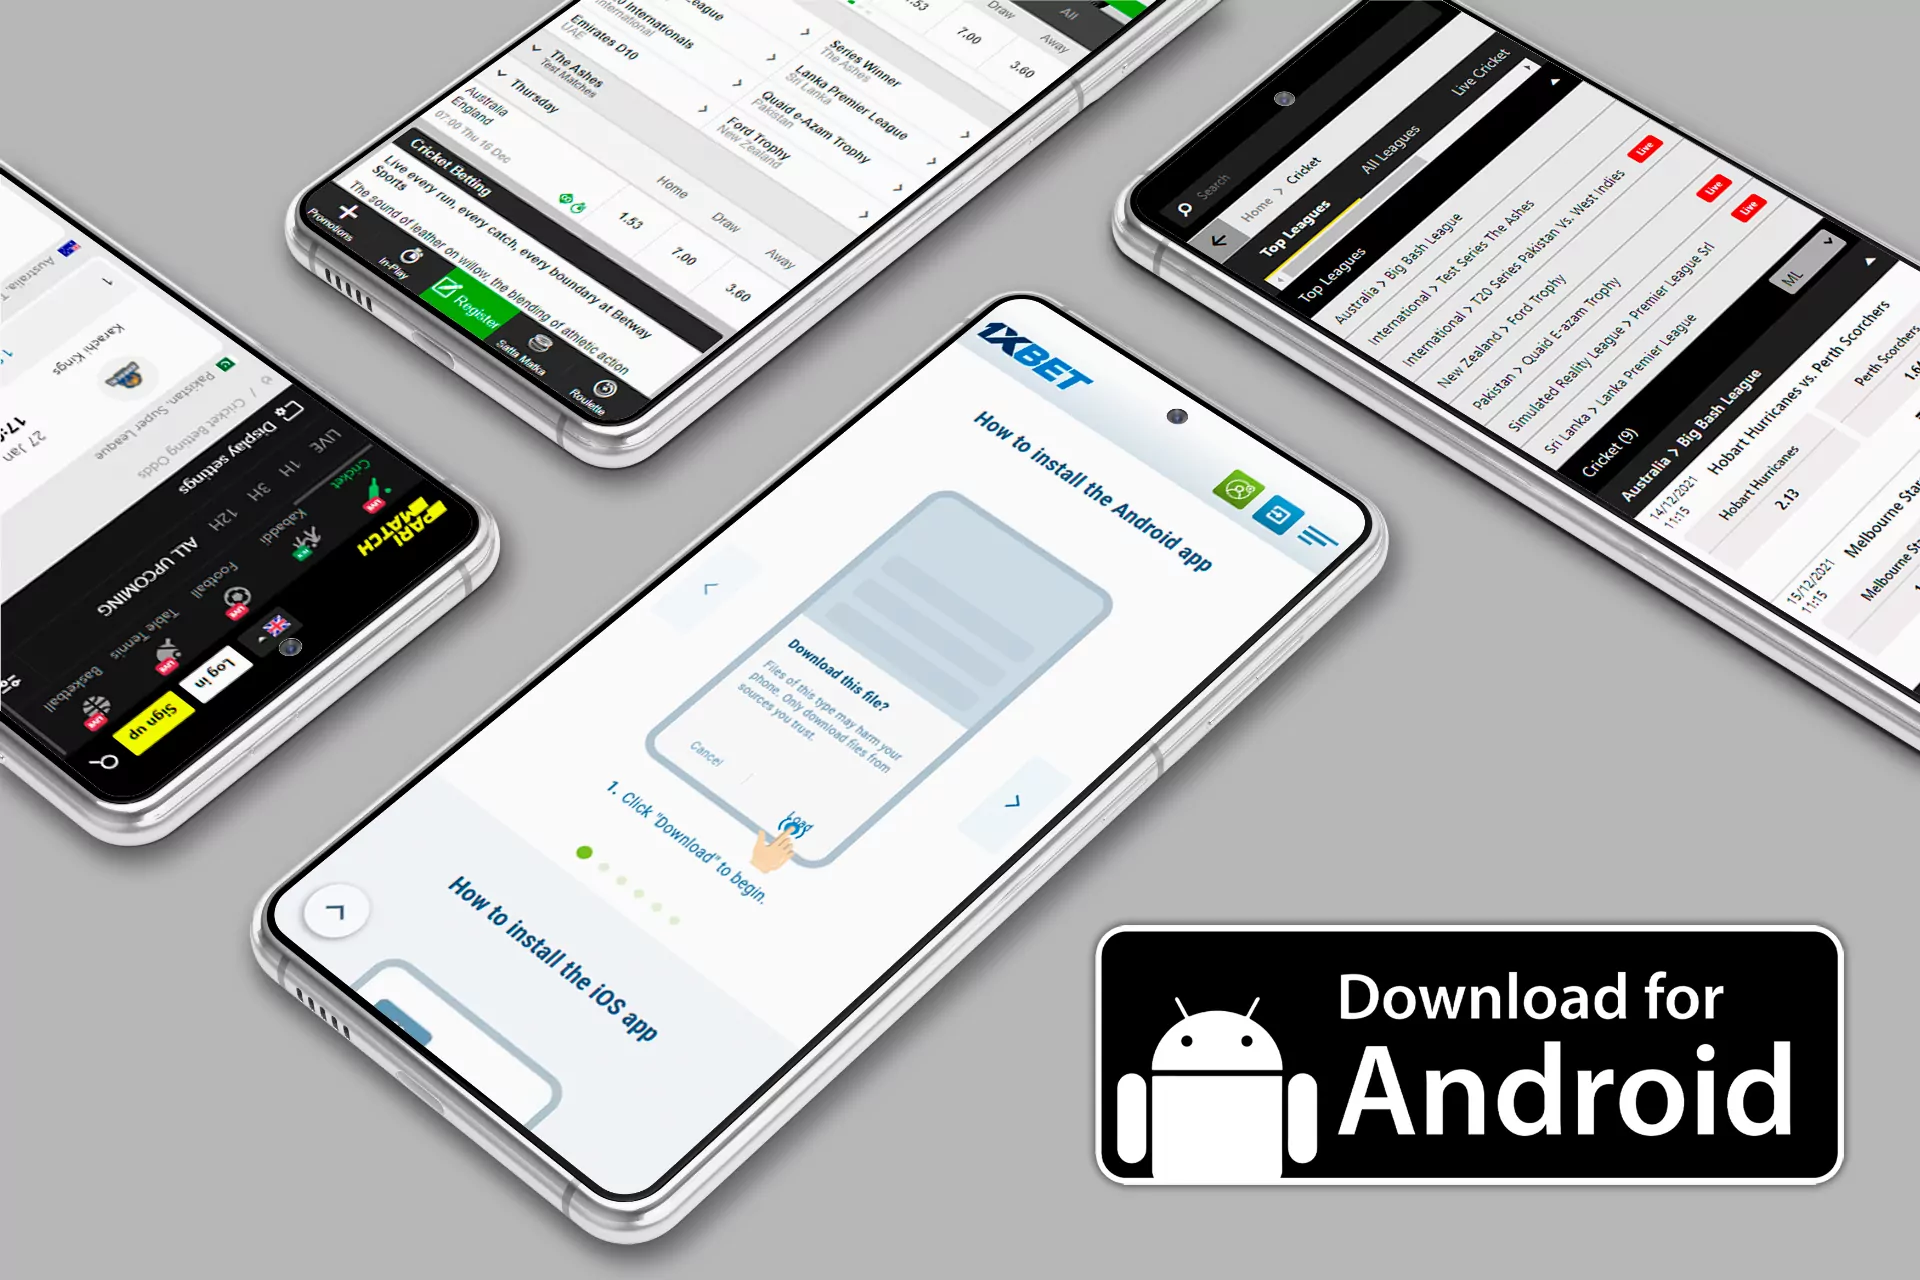 You can download Android app from the official site of the bookmaker.